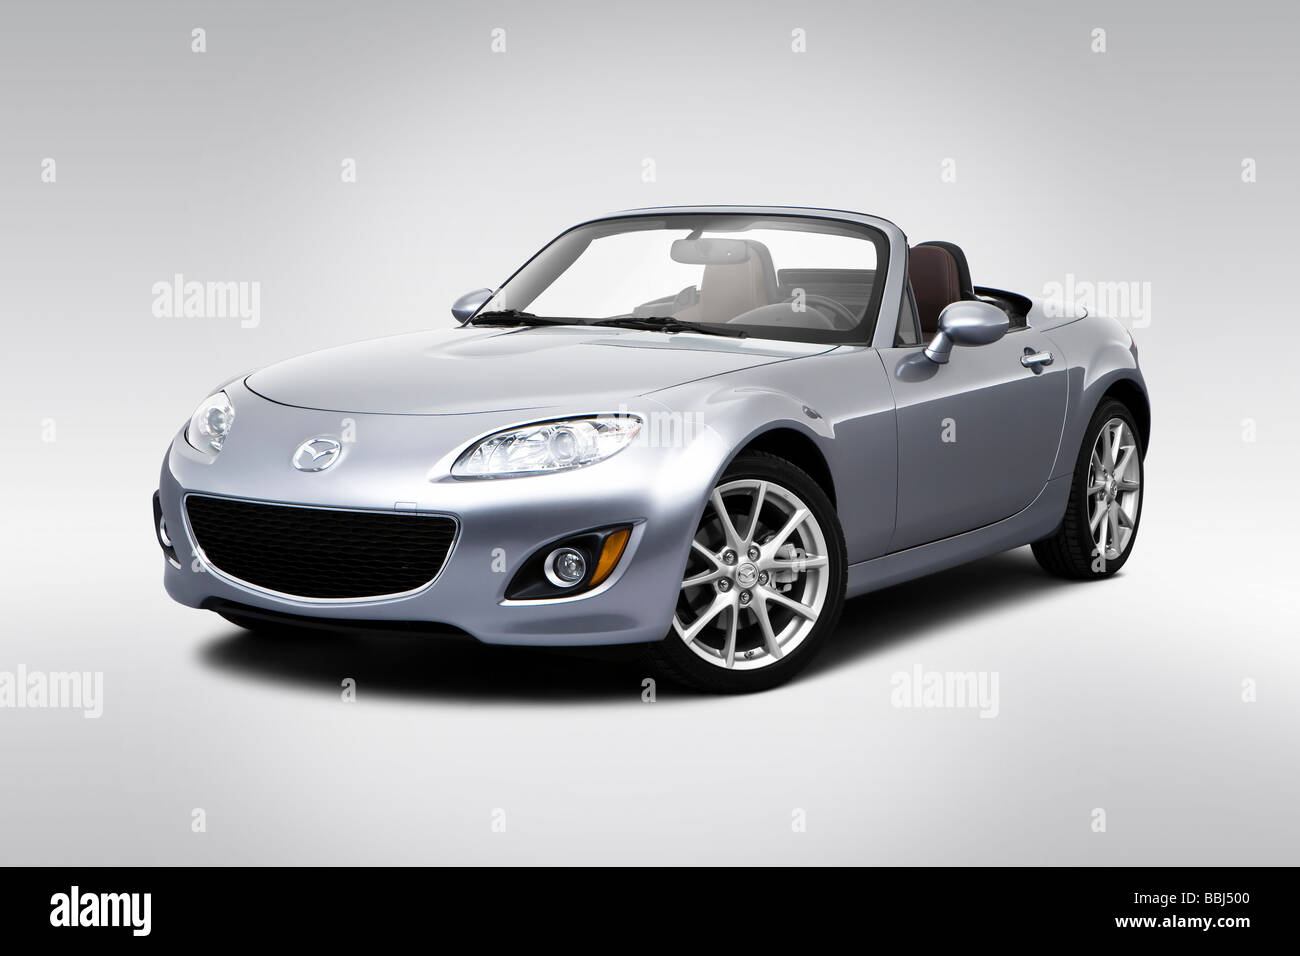 2009 Mazda MX-5 GT Hardtop in Silver - Front angle view Stock Photo